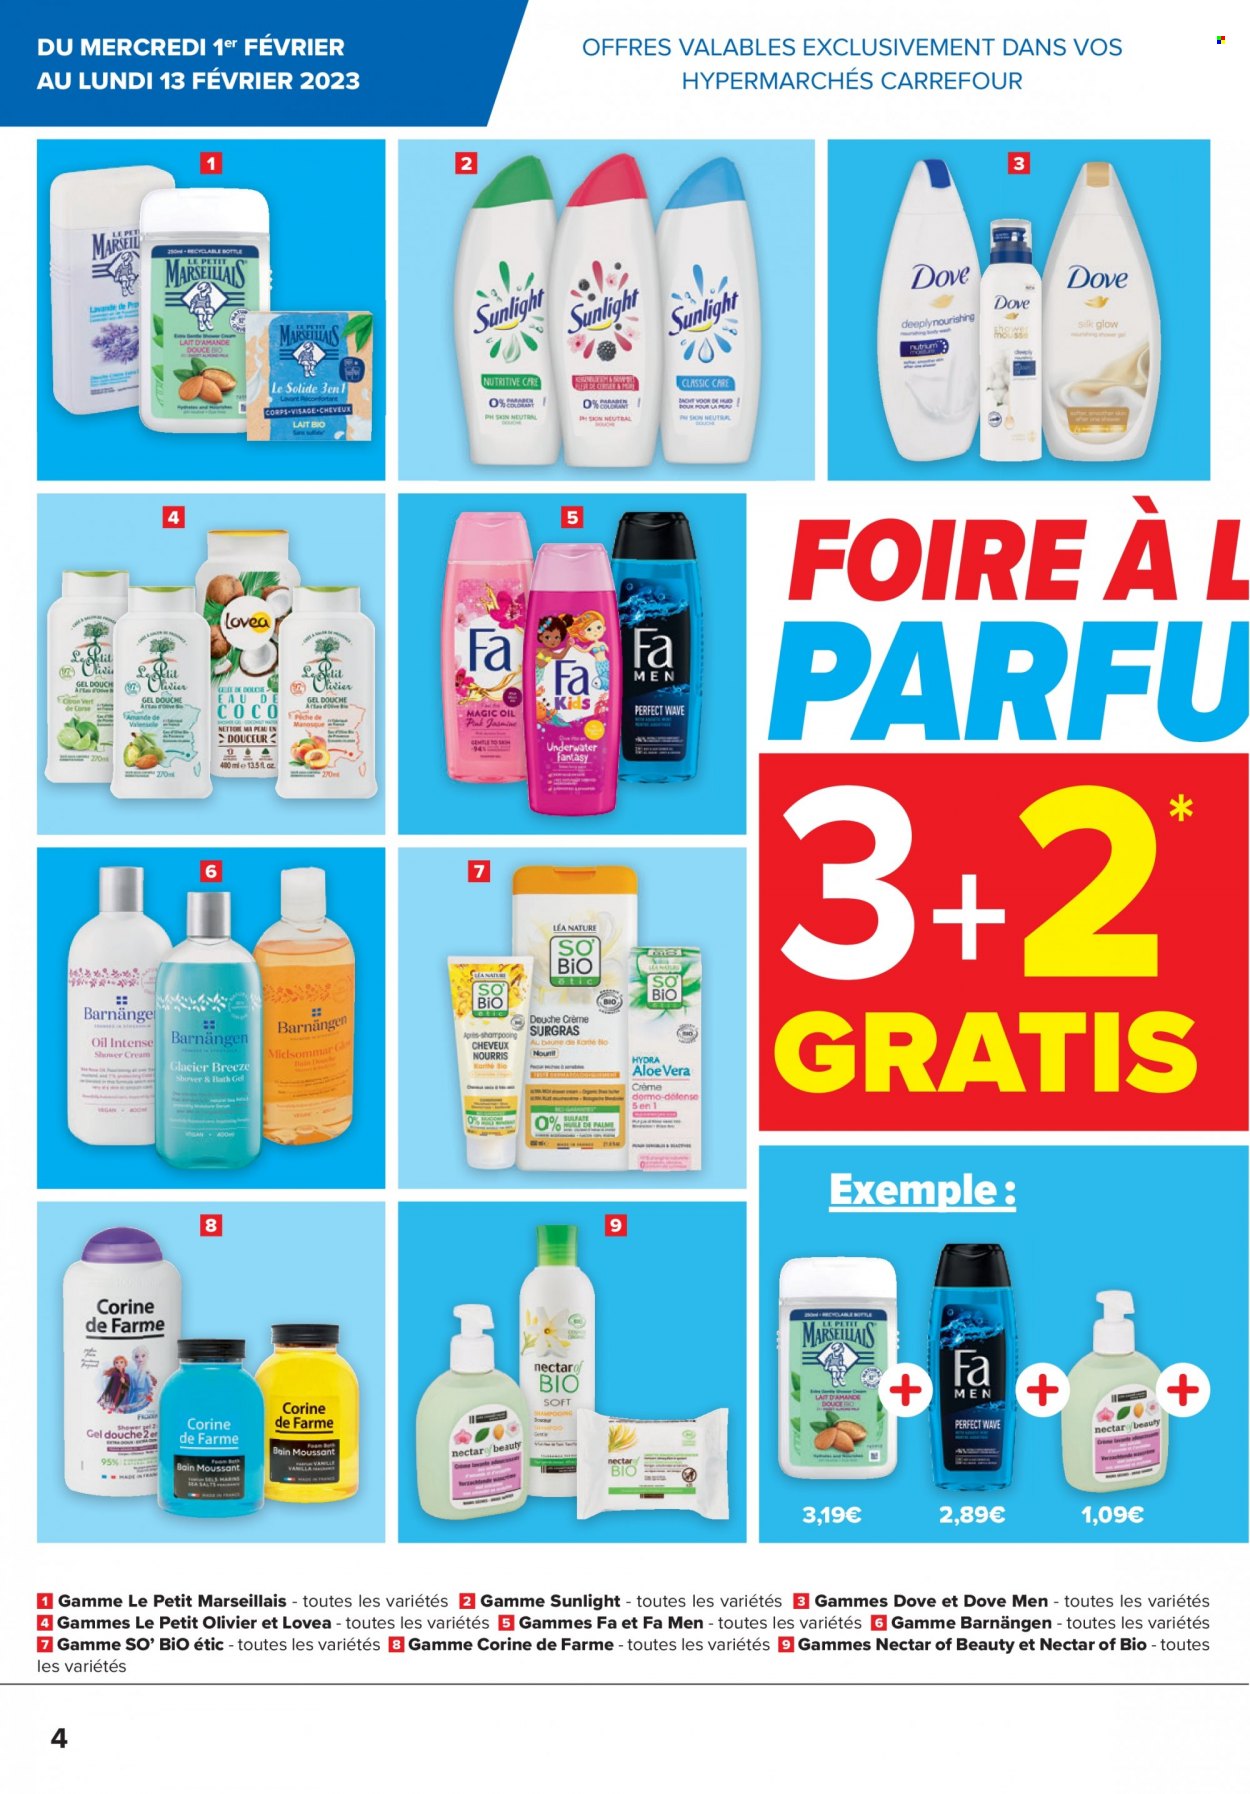 Catalogue Carrefour hypermarkt - 1.2.2023 - 13.2.2023. Page 4.